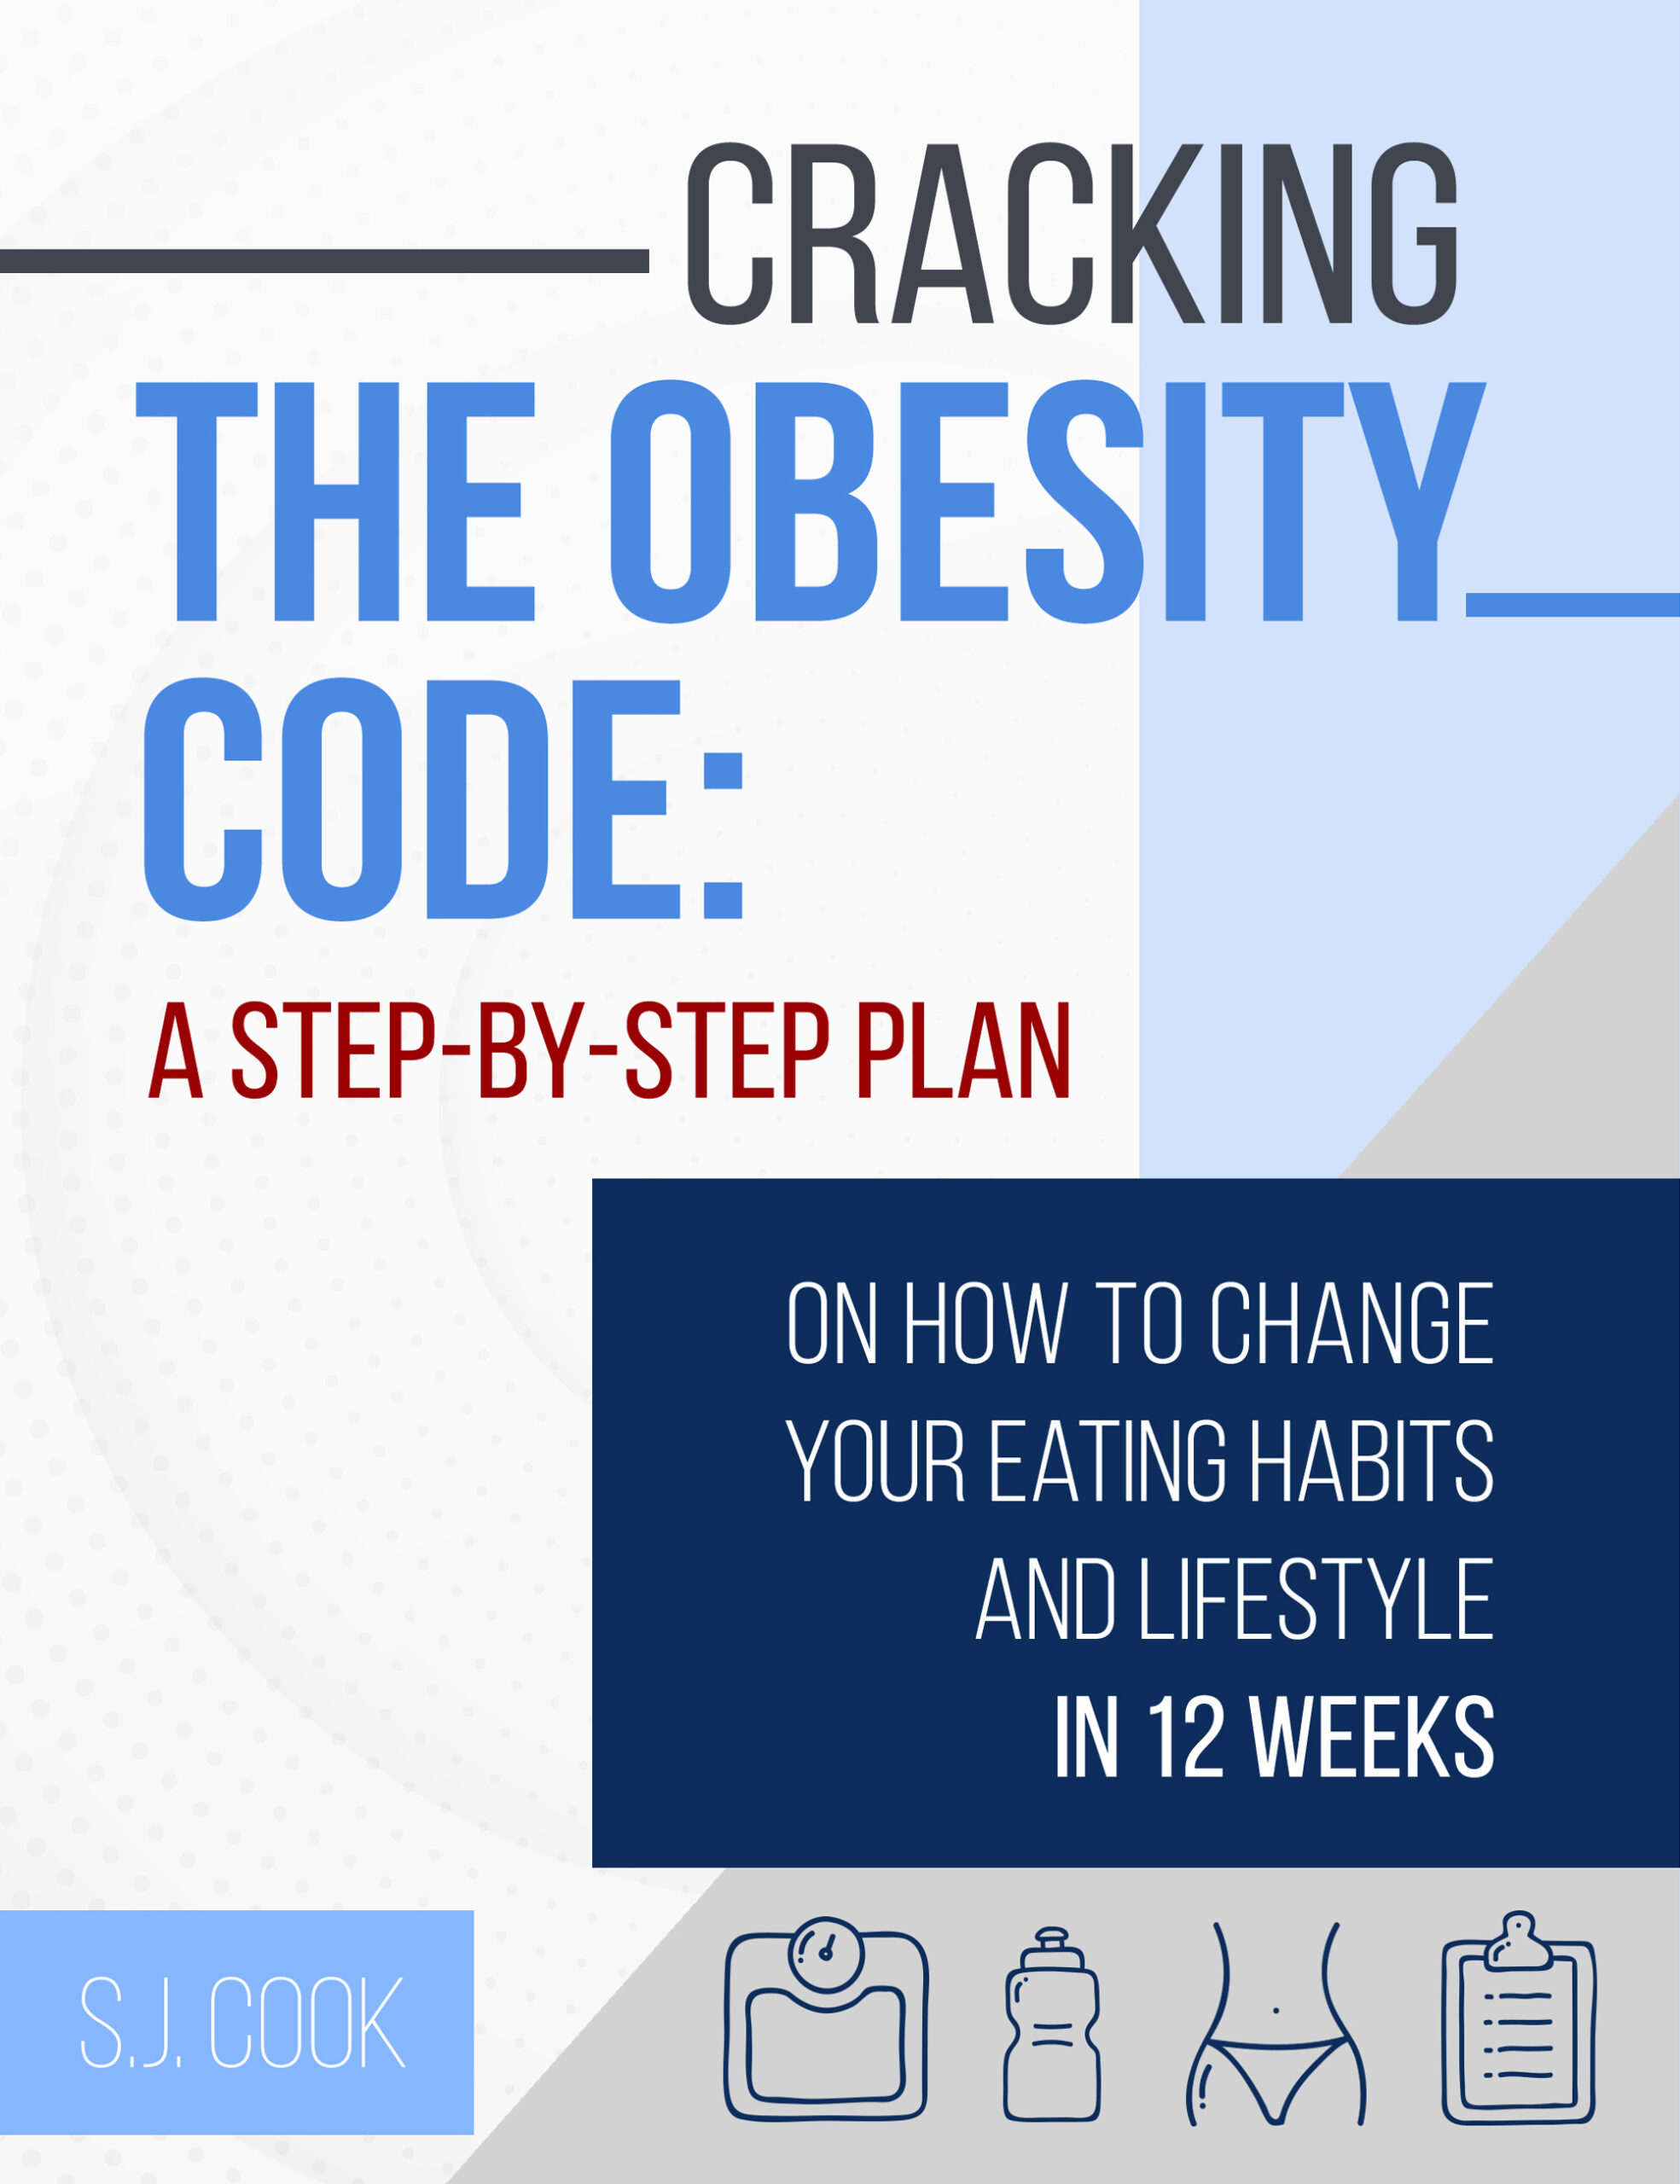 FREE: Cracking The Obesity Code by S.J. Cook